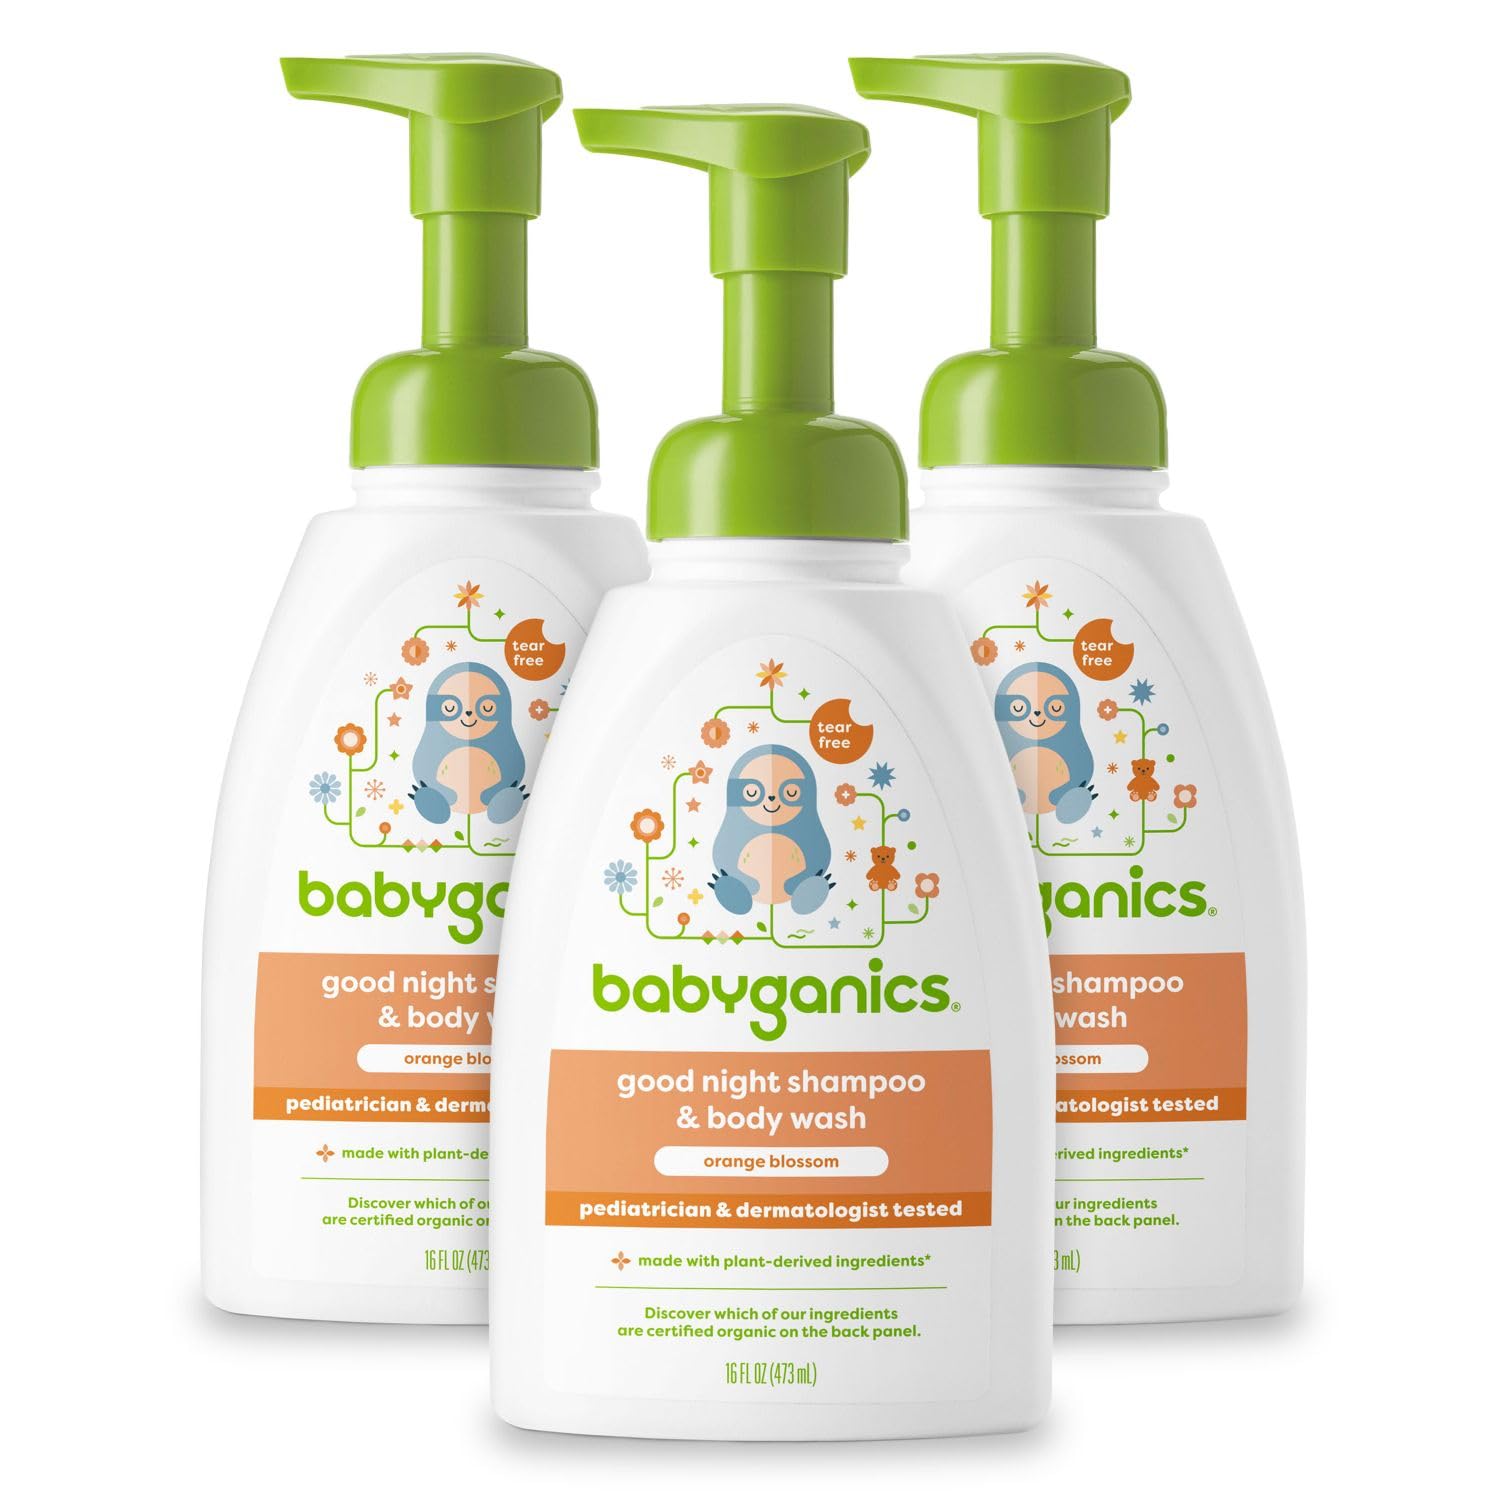 Babyganics Baby Shampoo + Body Wash Pump Bottle, Orange Blossom, Non-Allergenic and Tear-Free, 16 Fl Oz (Pack of 3), Packaging May Vary